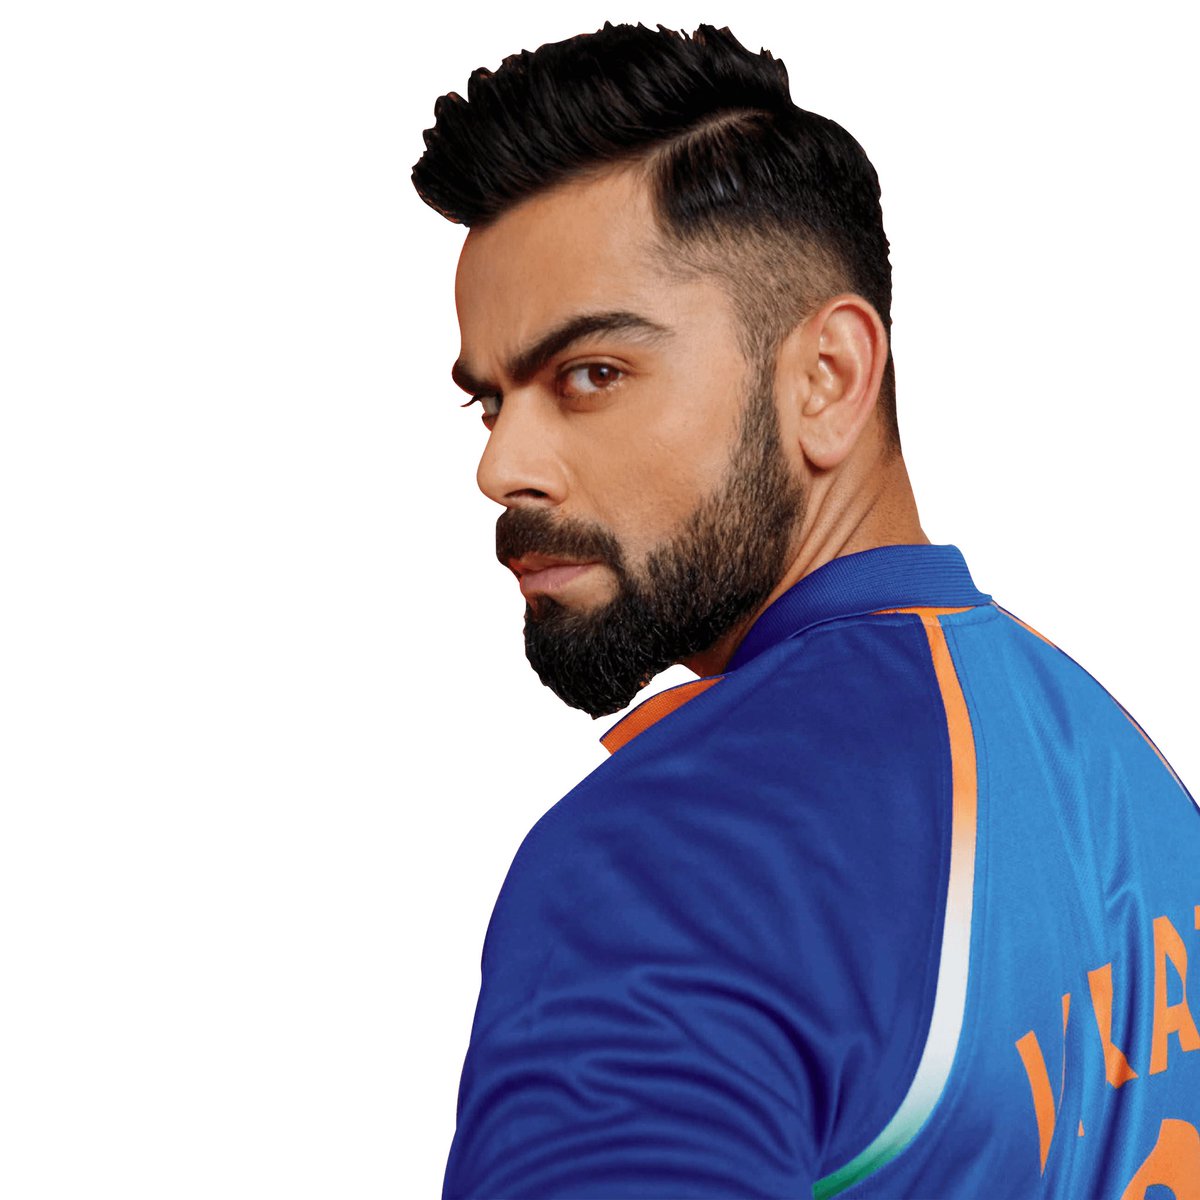  @imVkohli (2008 - present)  @cricketworldcup - 2011,2015,2019 @T20WorldCup - 2012,2014,2016Champions Trophy- 2009,2013,2017Not to be a part of 2009&2010 T20 World cup